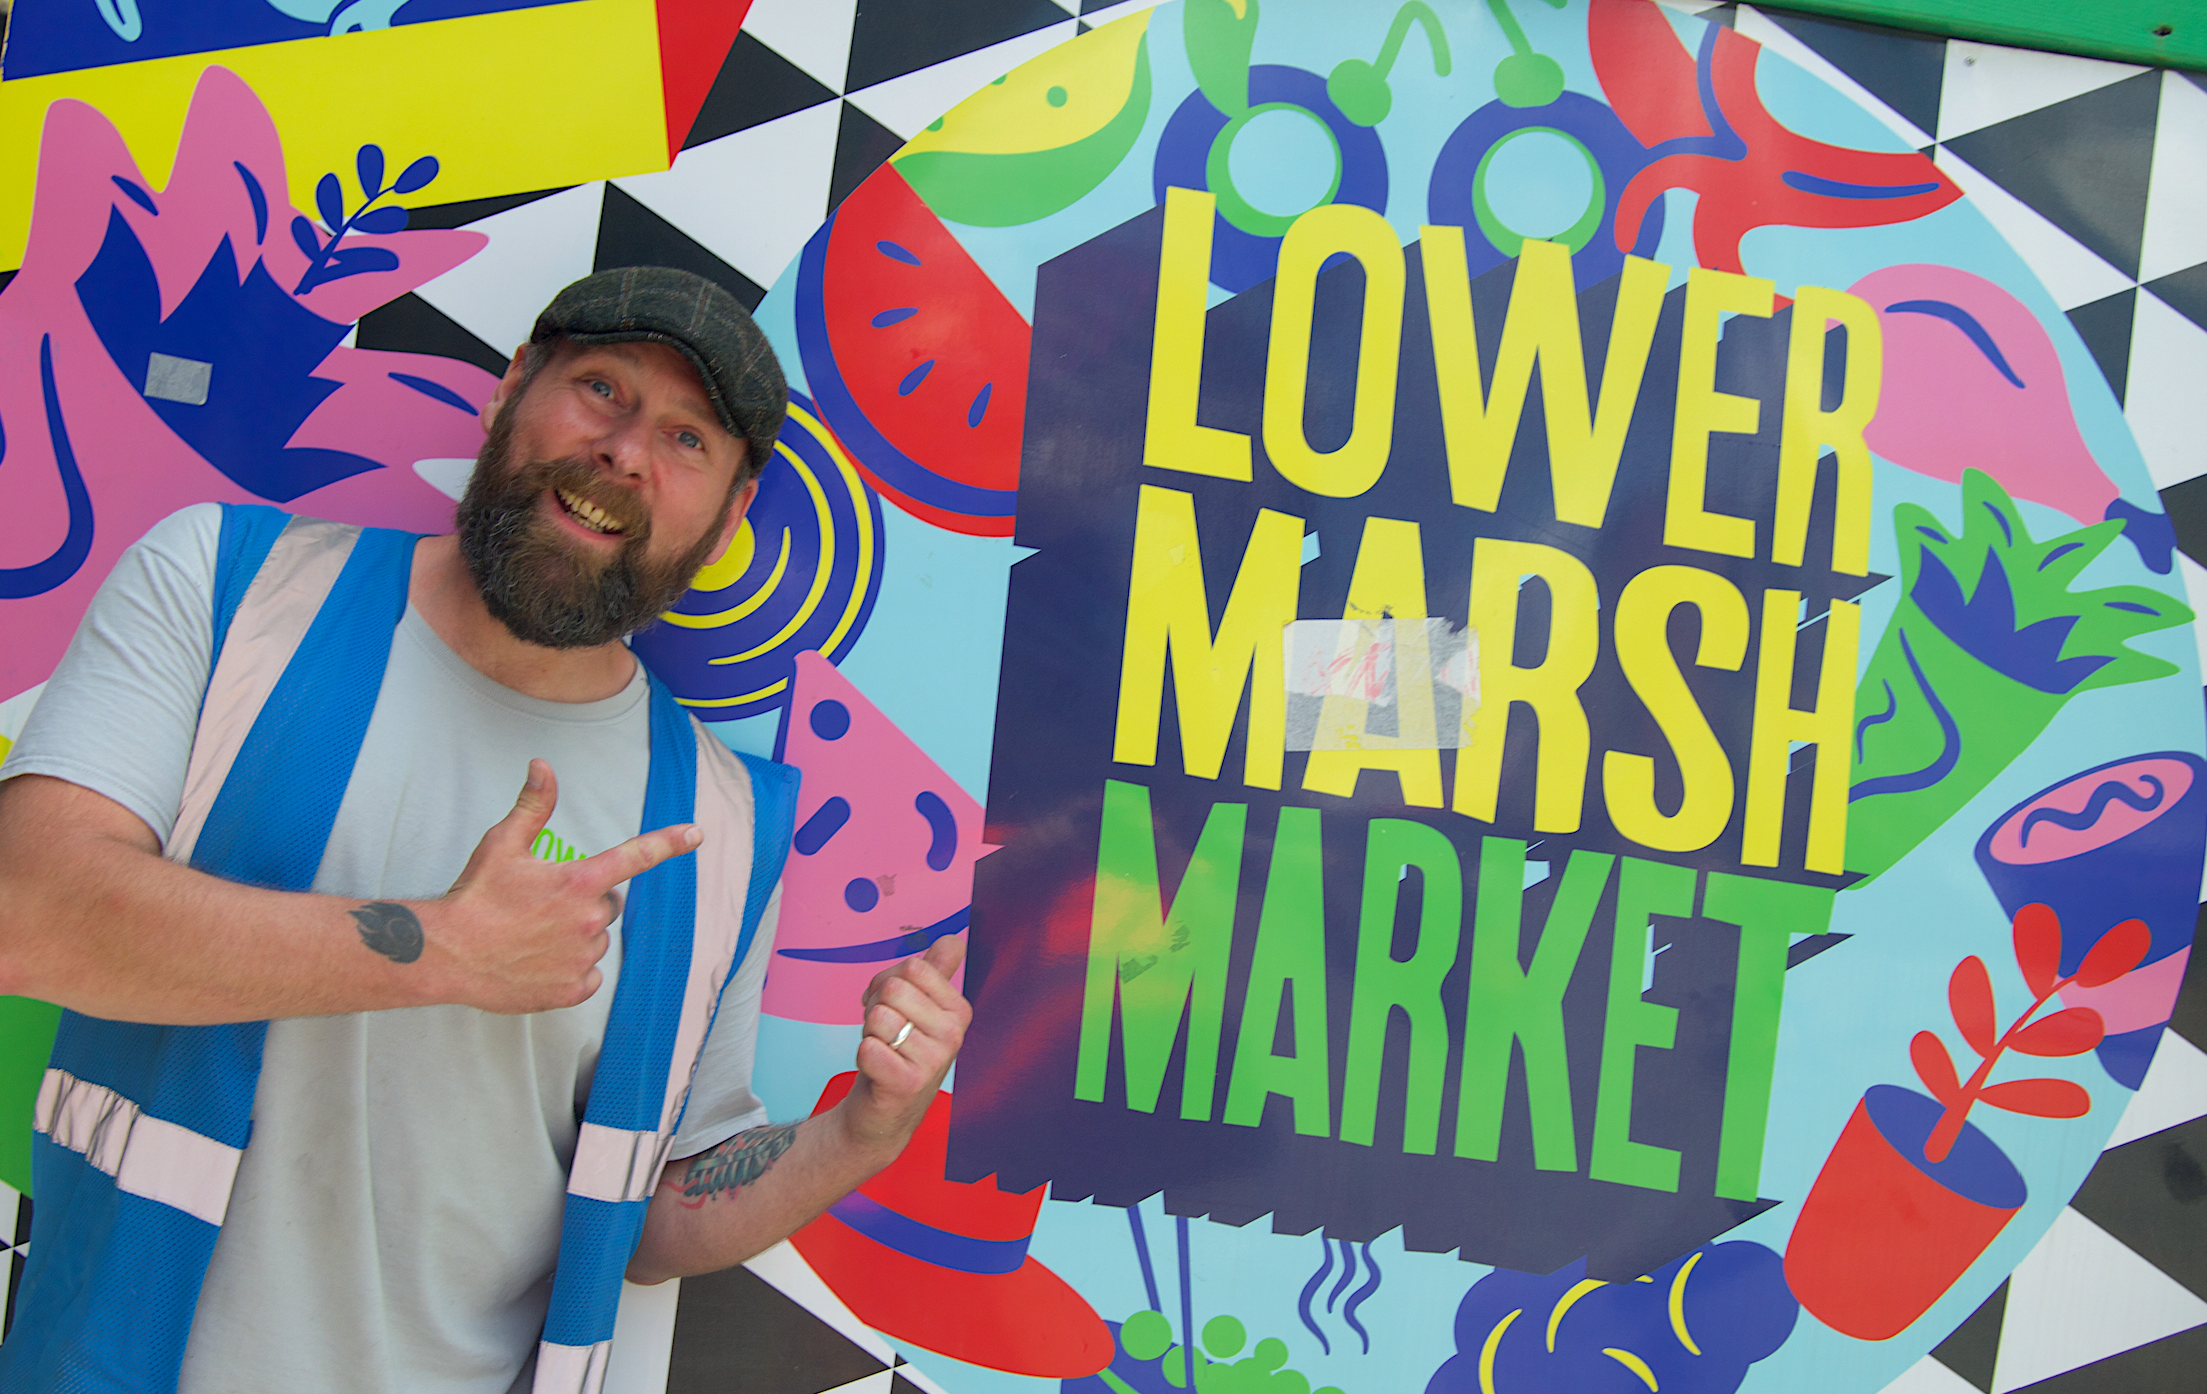 Get Your Lower Marsh Market Loyalty Card